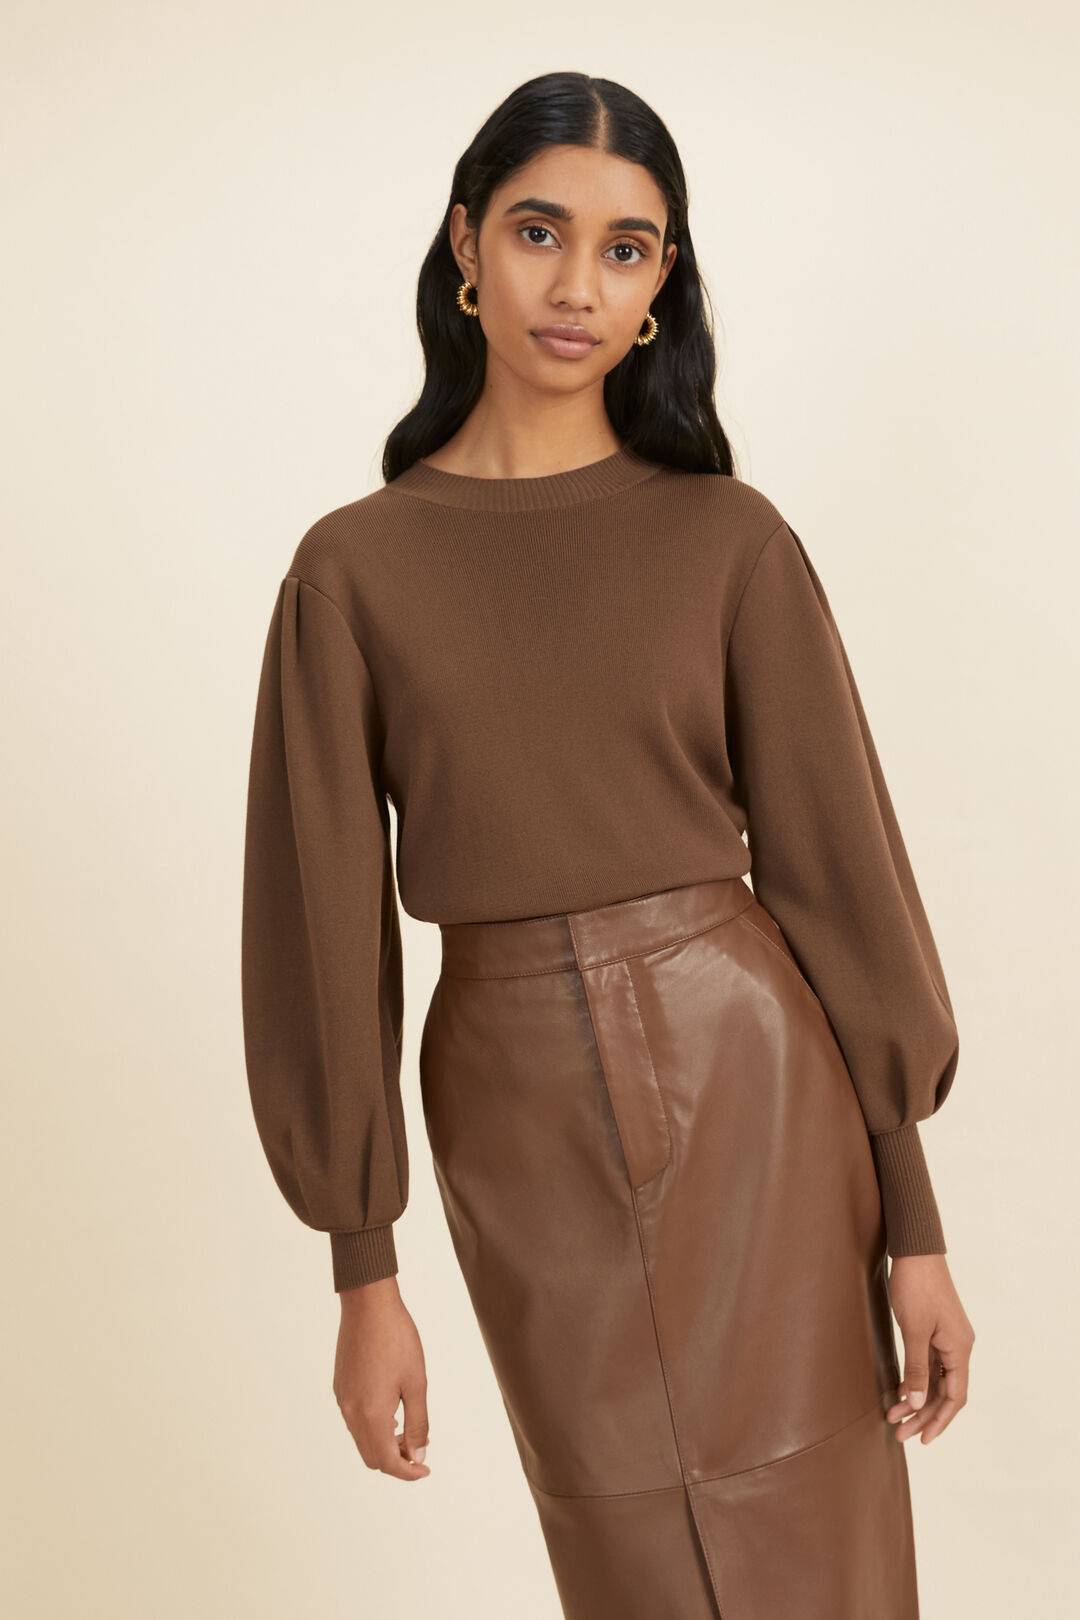 Crepe Knit Tuck Sleeve Sweater  Coconut Brown  hi-res